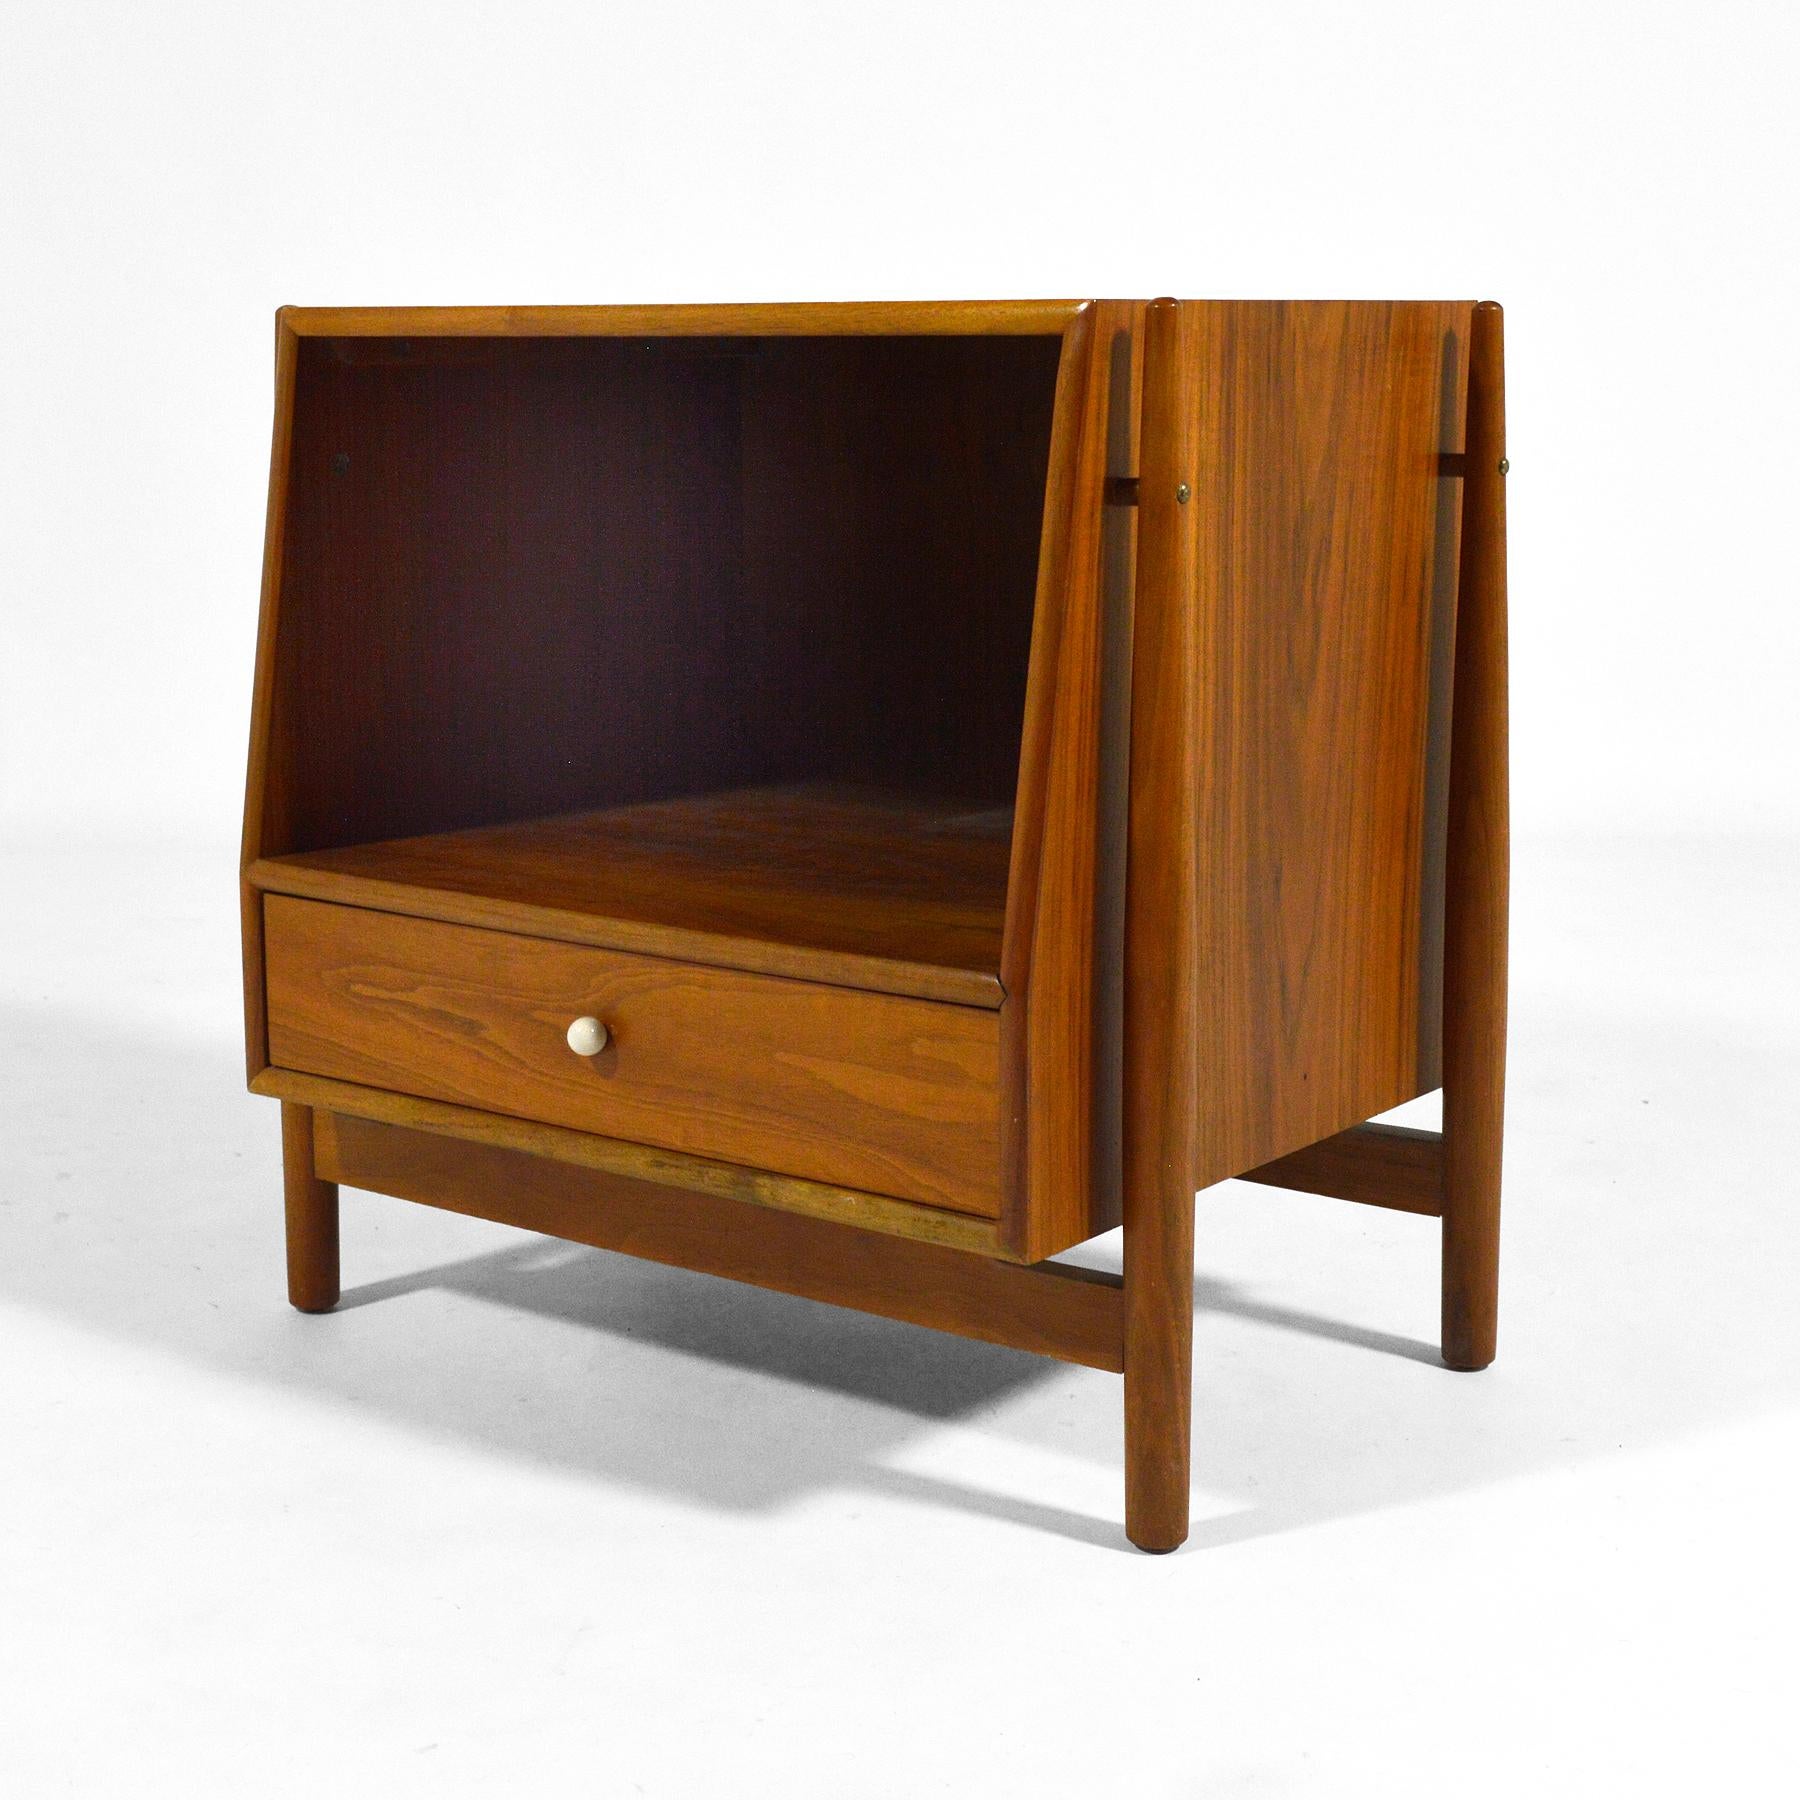 This beautifully detailed nightstand in walnut by Kipp Stewart & Stewart MacDougall for their 